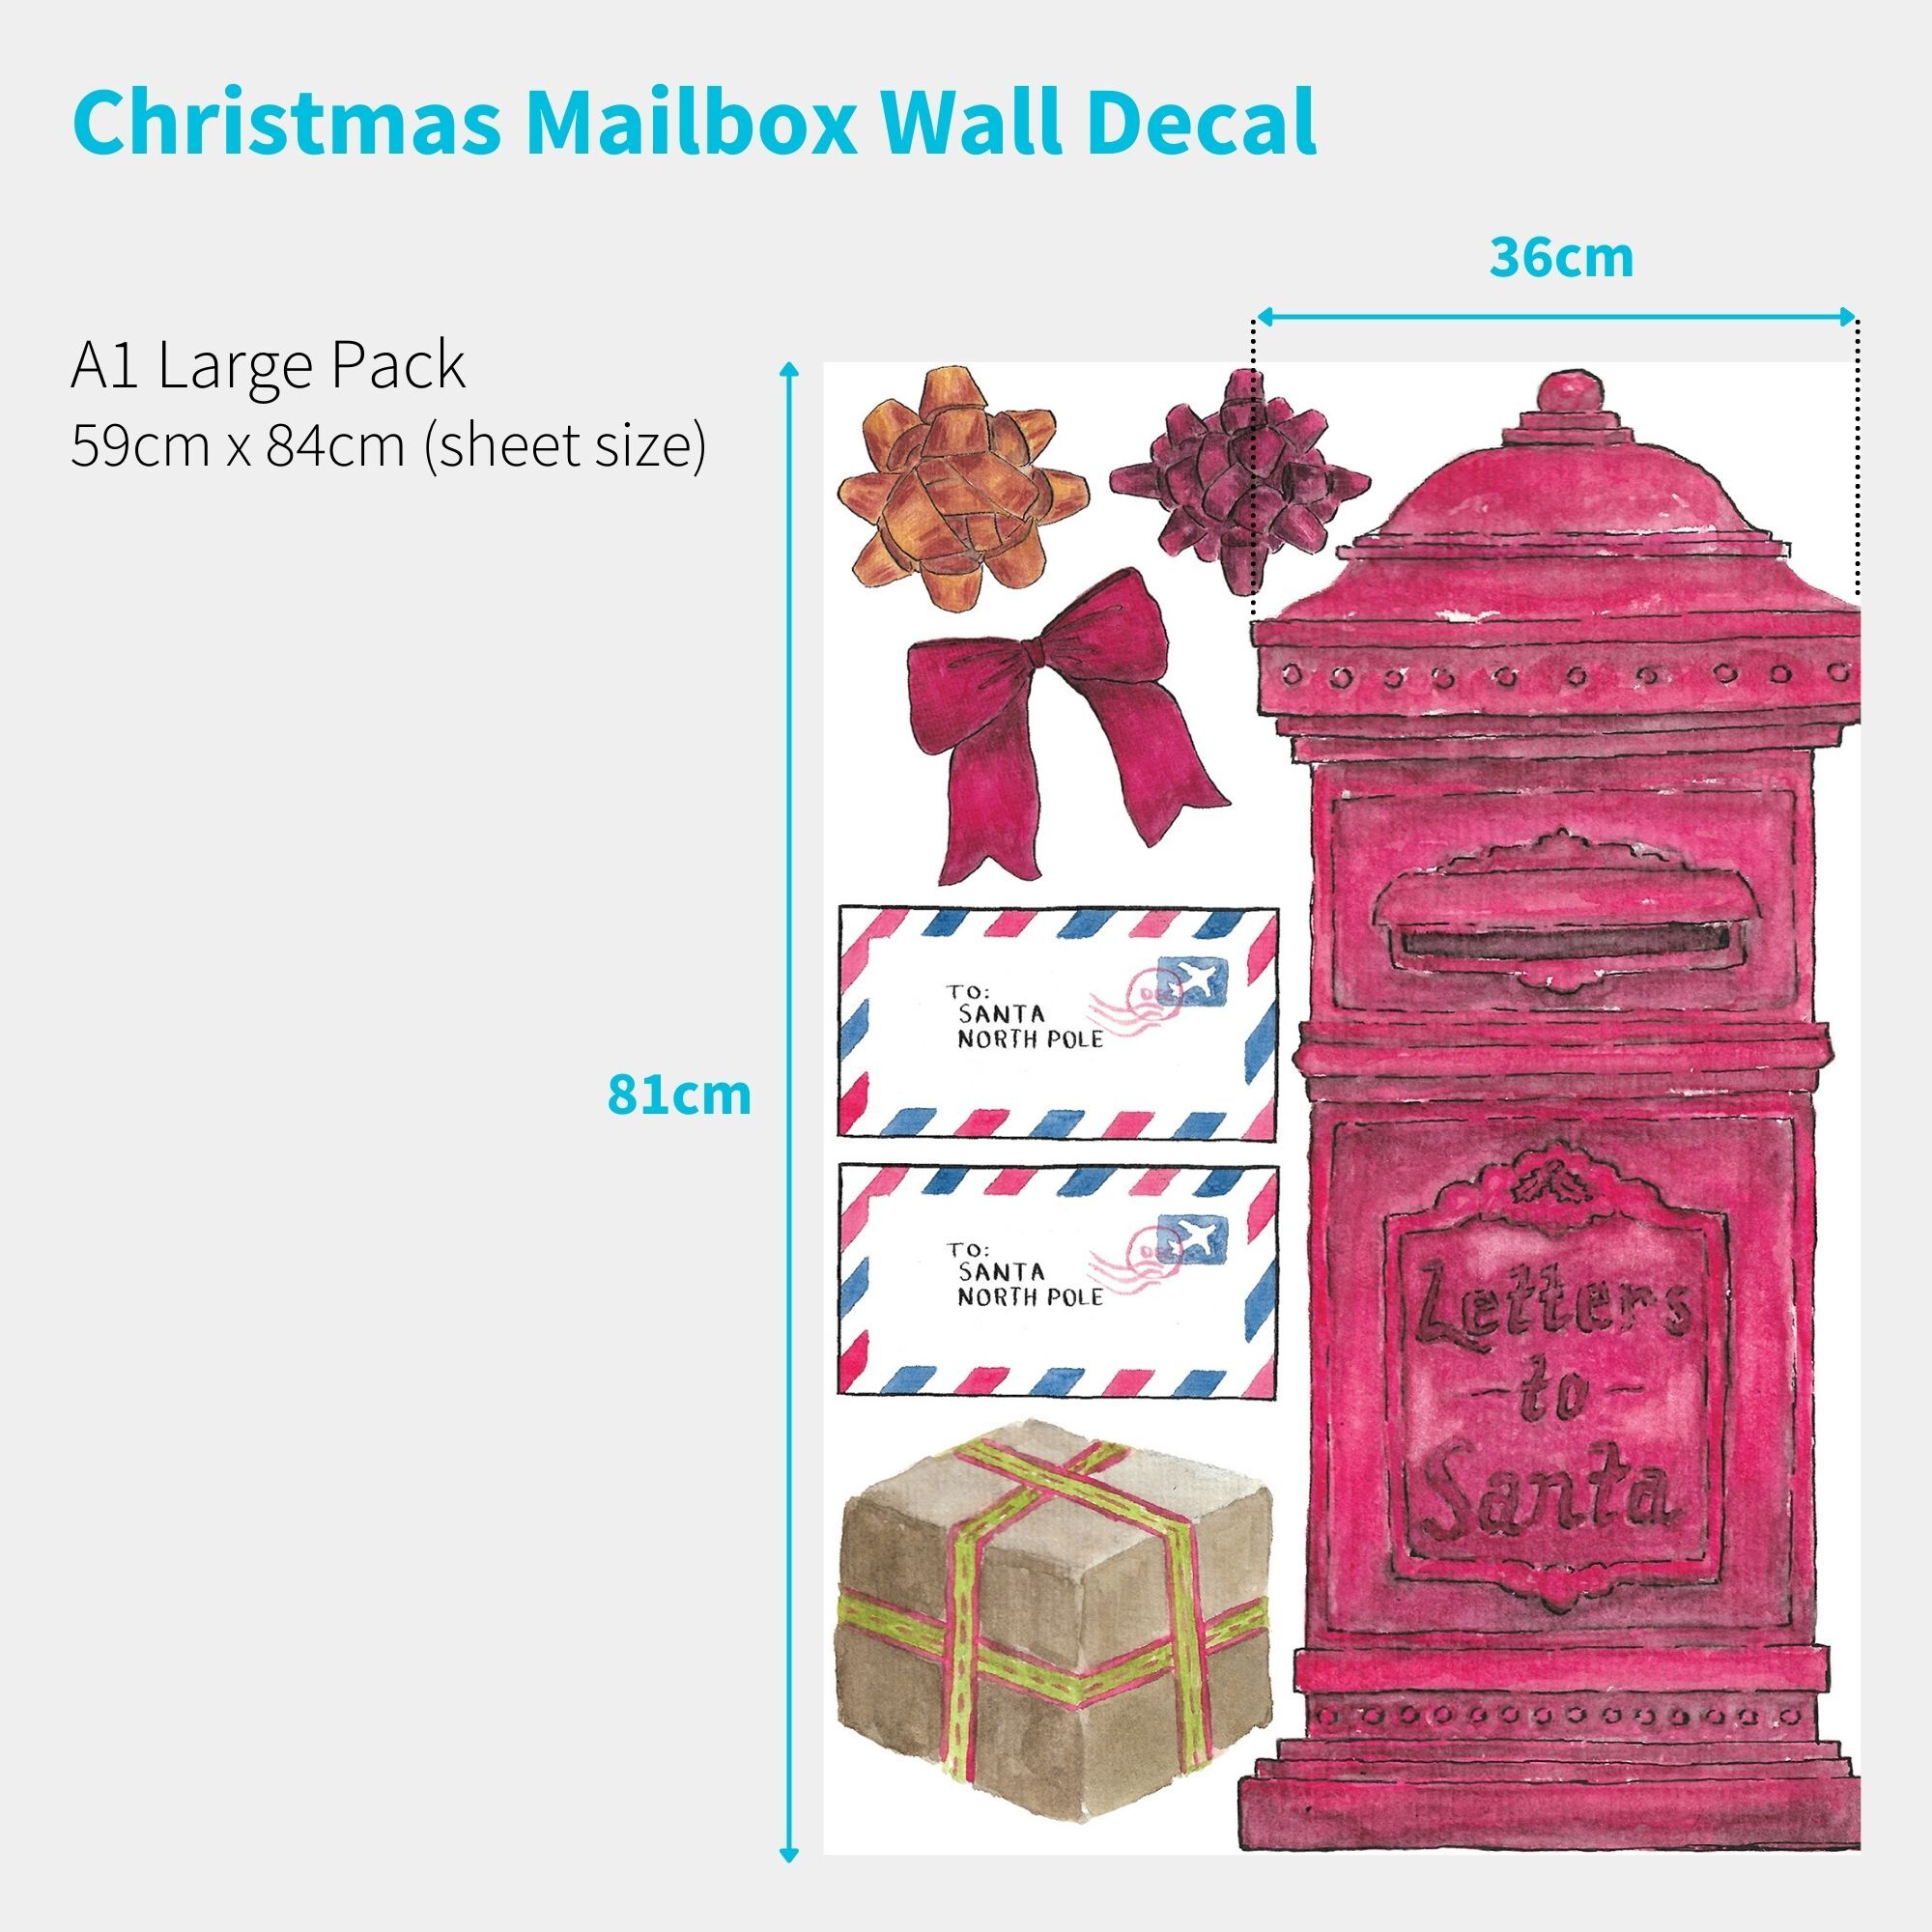 WD-Mailbox - C - A1 Large pack